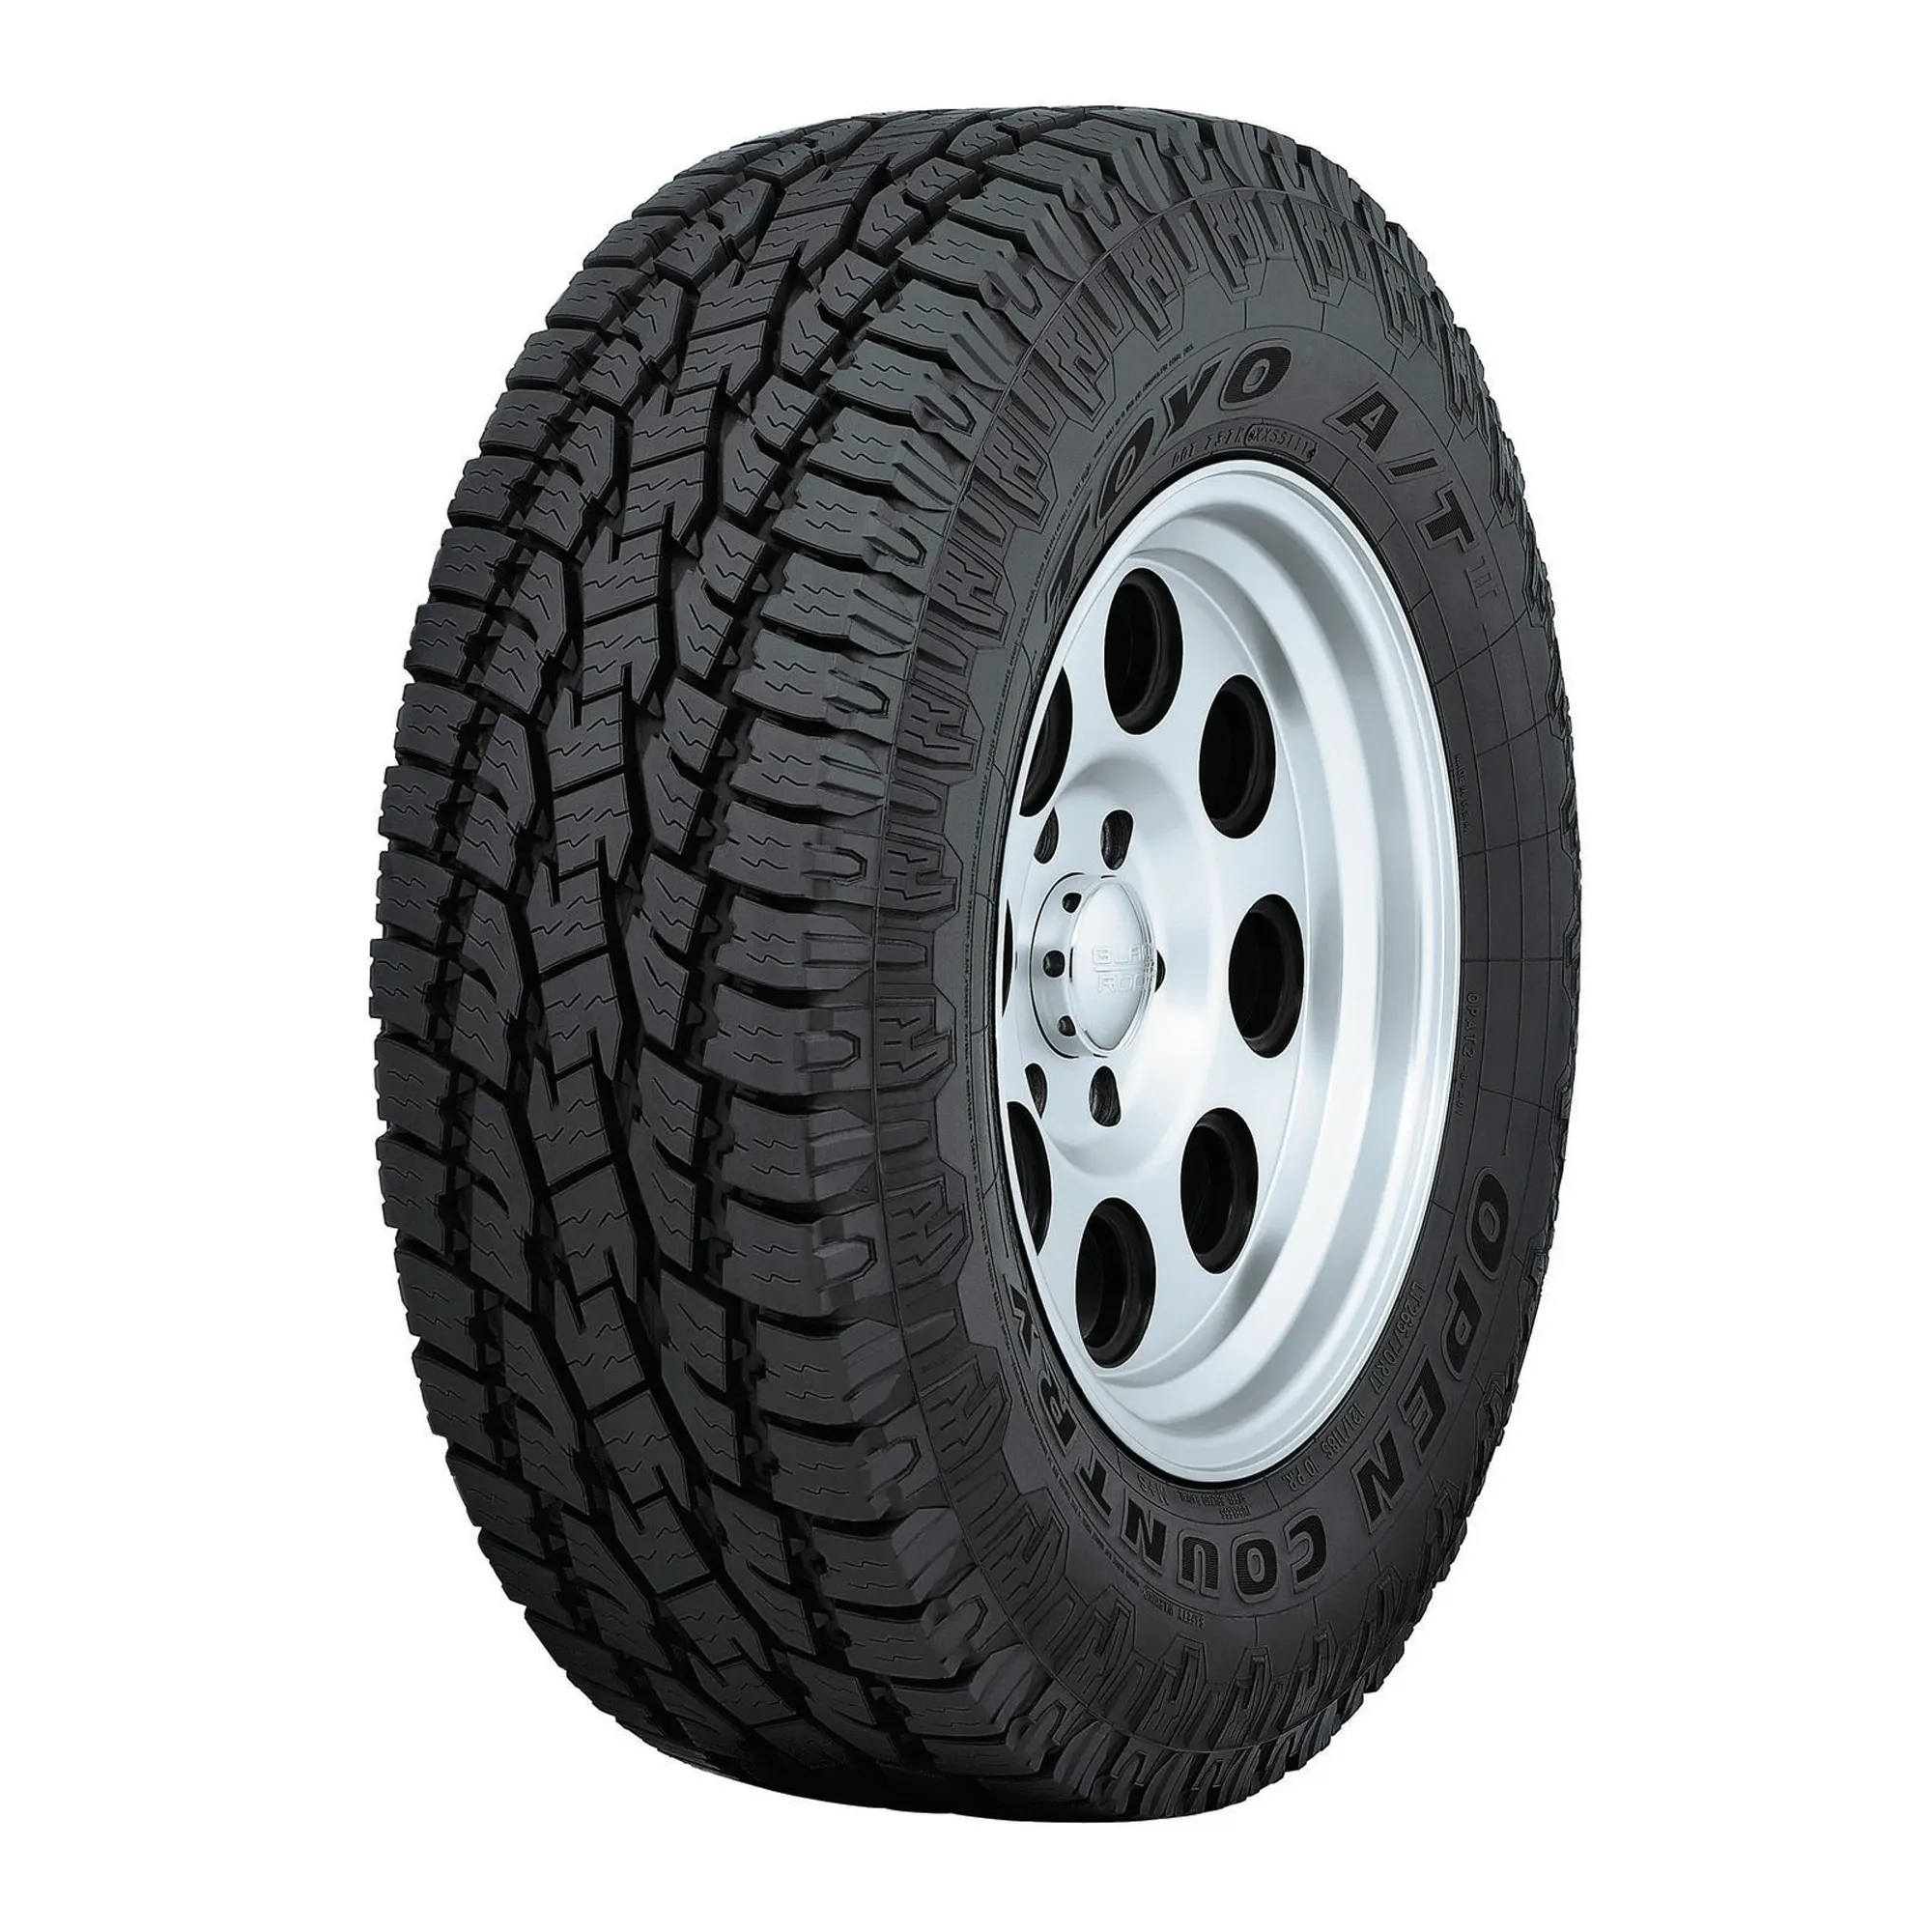 Шина 265/75R16 119/116S Open Country A/T Plus